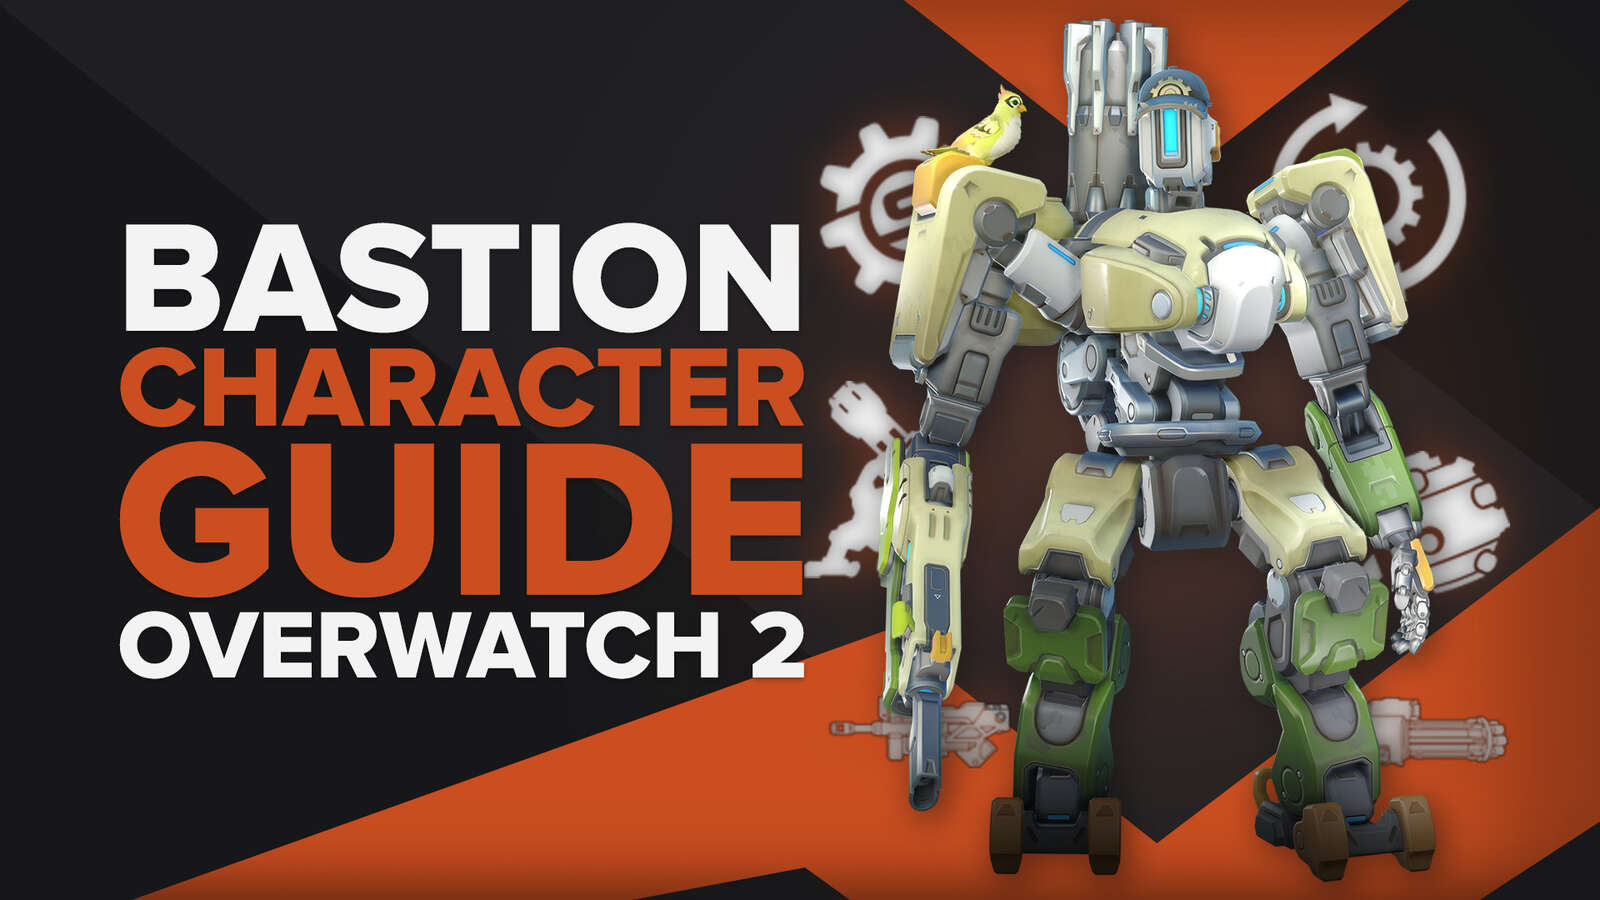 How To Play Bastion in Overwatch 2 [Guide, Tips & More]